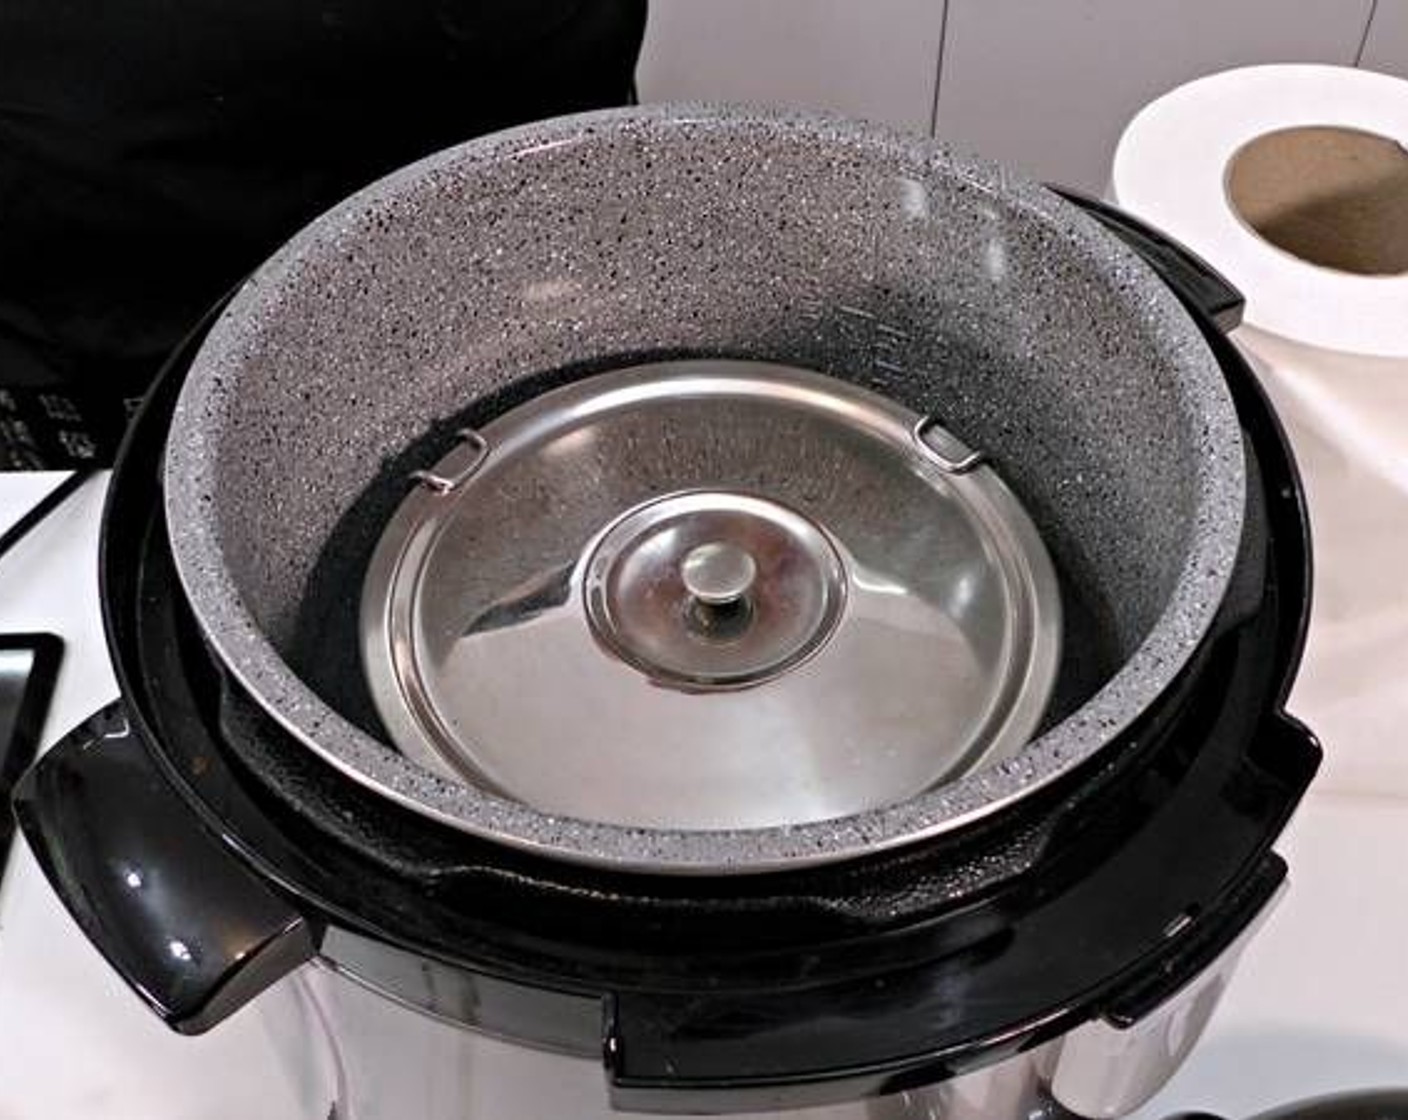 step 5 Place the lid on the metal pot and into your pressure cooker. Add enough water to cover half of the metal pot inside the cooker. Close the lid of your pressure cooker, close the valve, set it to cook for 12 minutes under "turbo" or any similar function on your cooker.